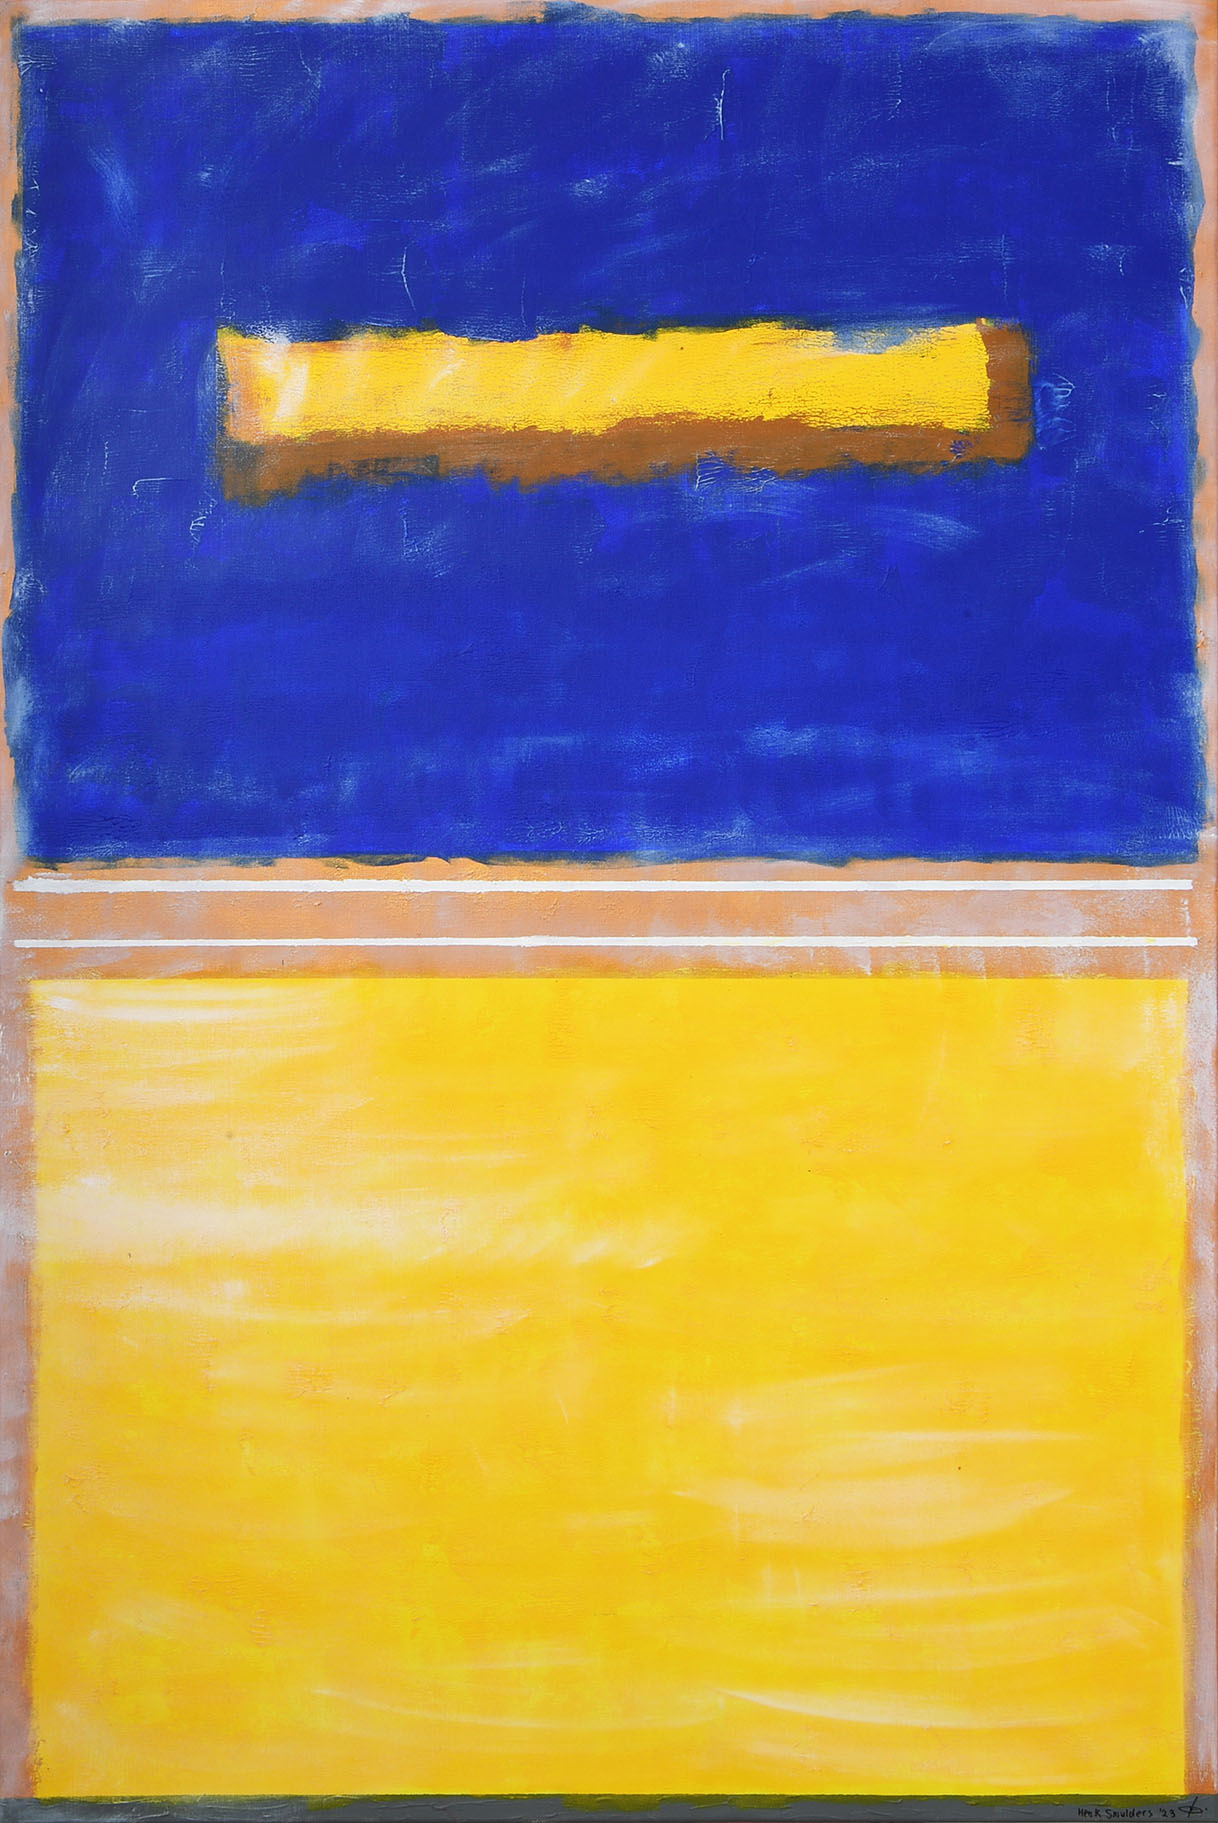 HENK SMULDERS // BLUE YELLOW